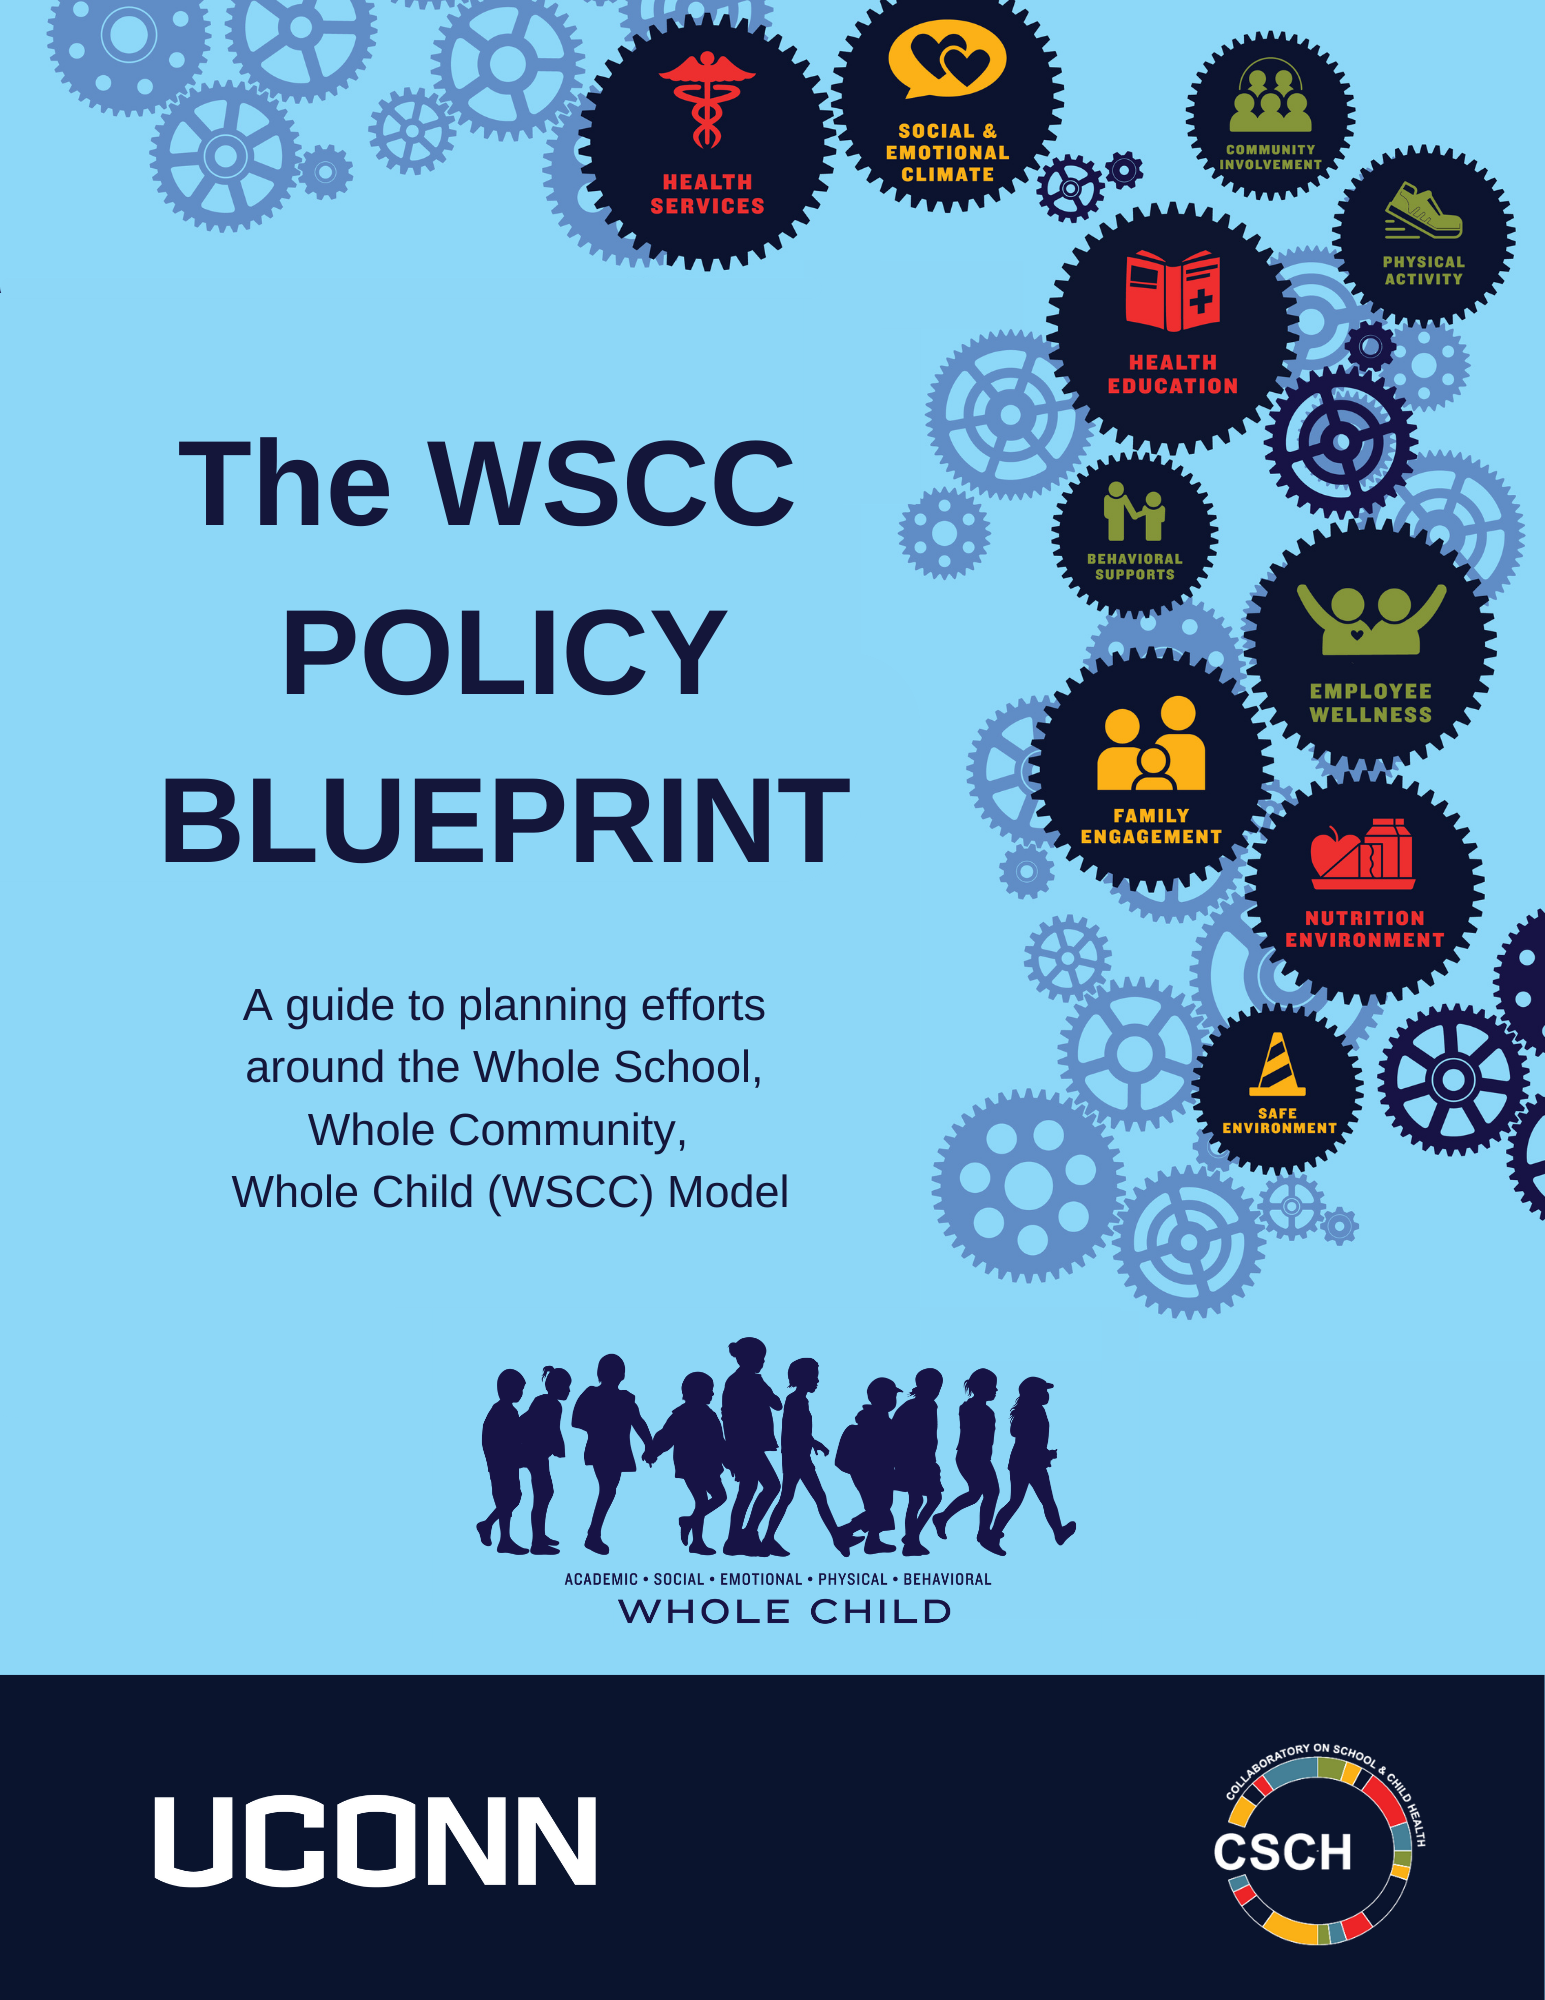 The WSCC Policy Blueprint: A guide to planning efforts around the Whole School, Whole Community, Whole Child (WSCC) Model